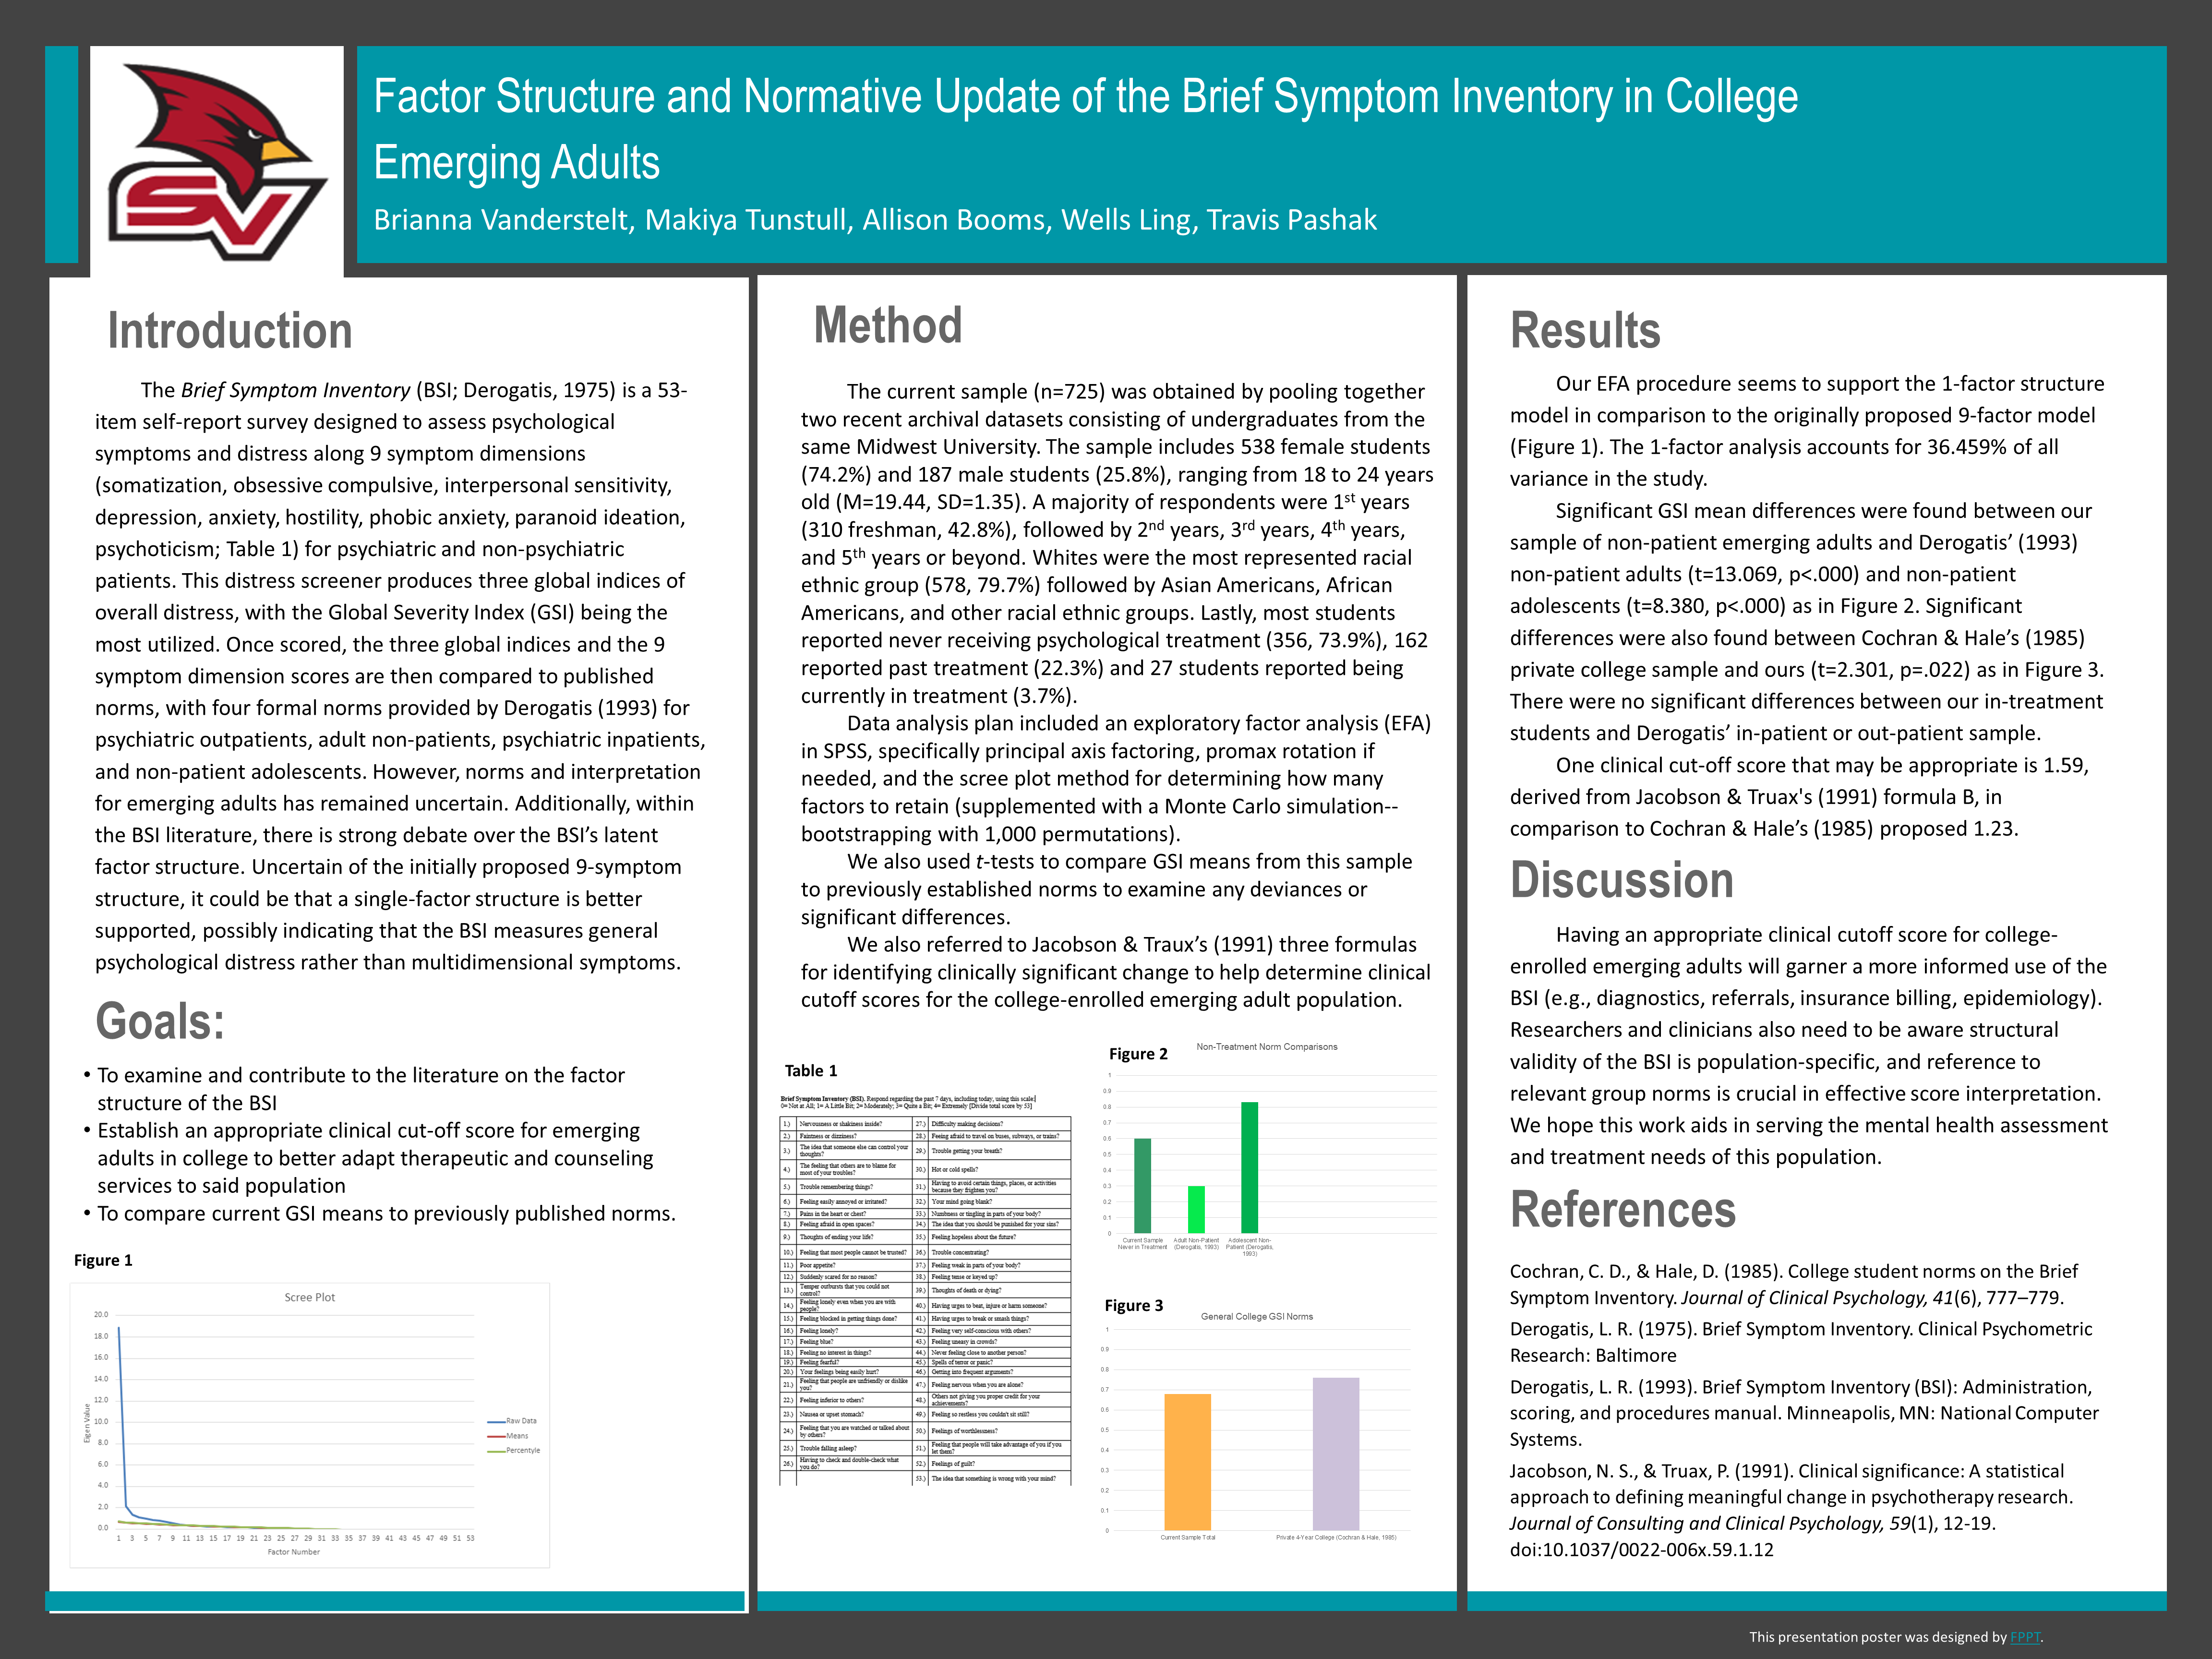 Factor Structure and Normative Update of the Brief Symptom Inventory in College